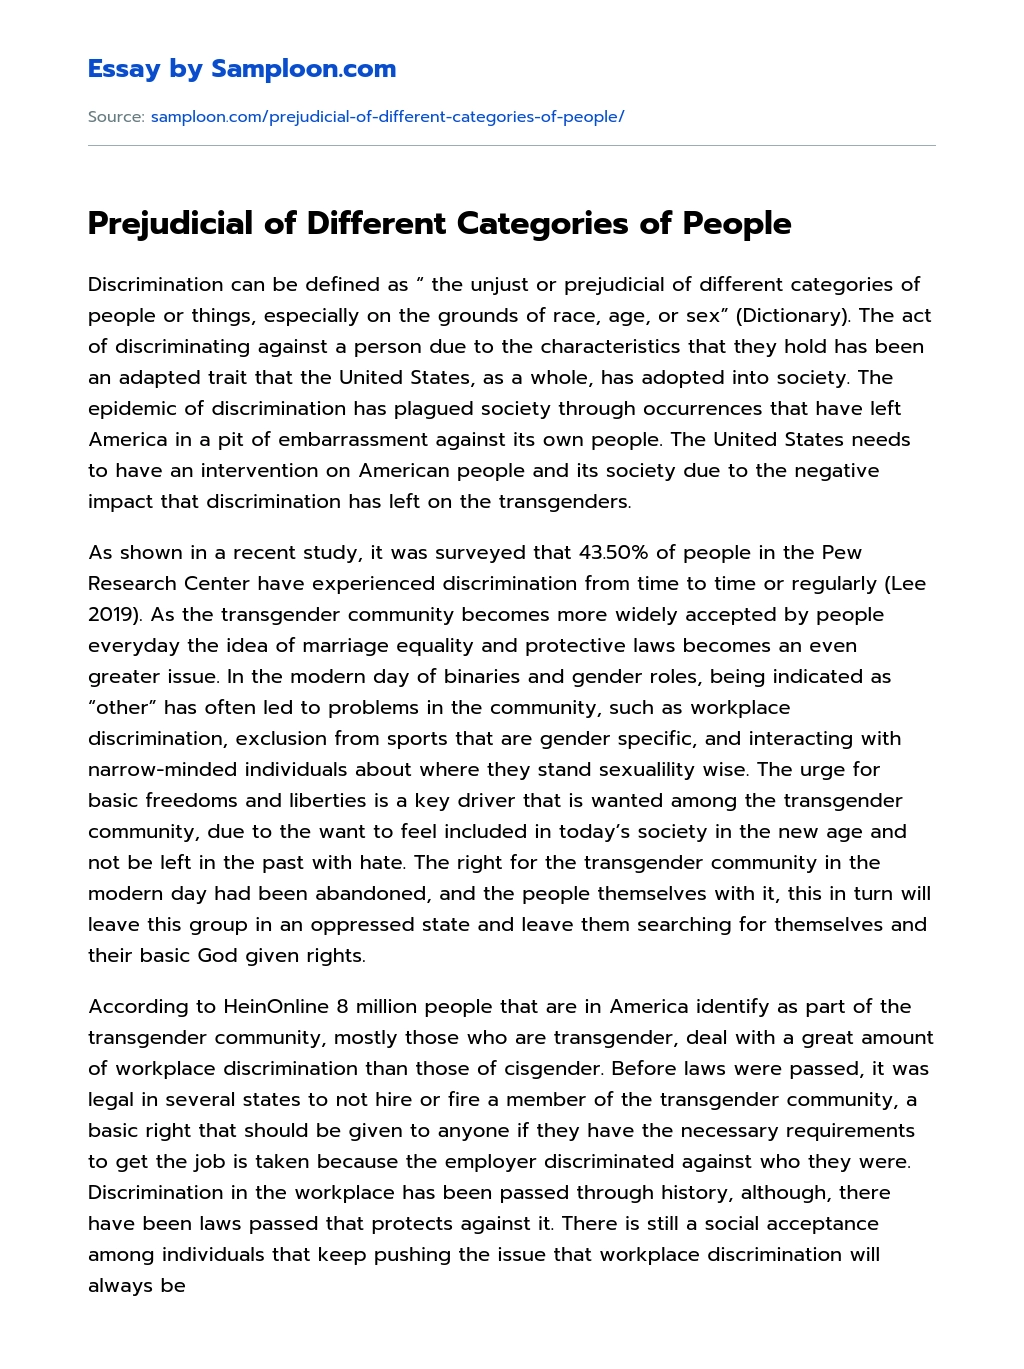 Prejudicial of Different Categories of People essay